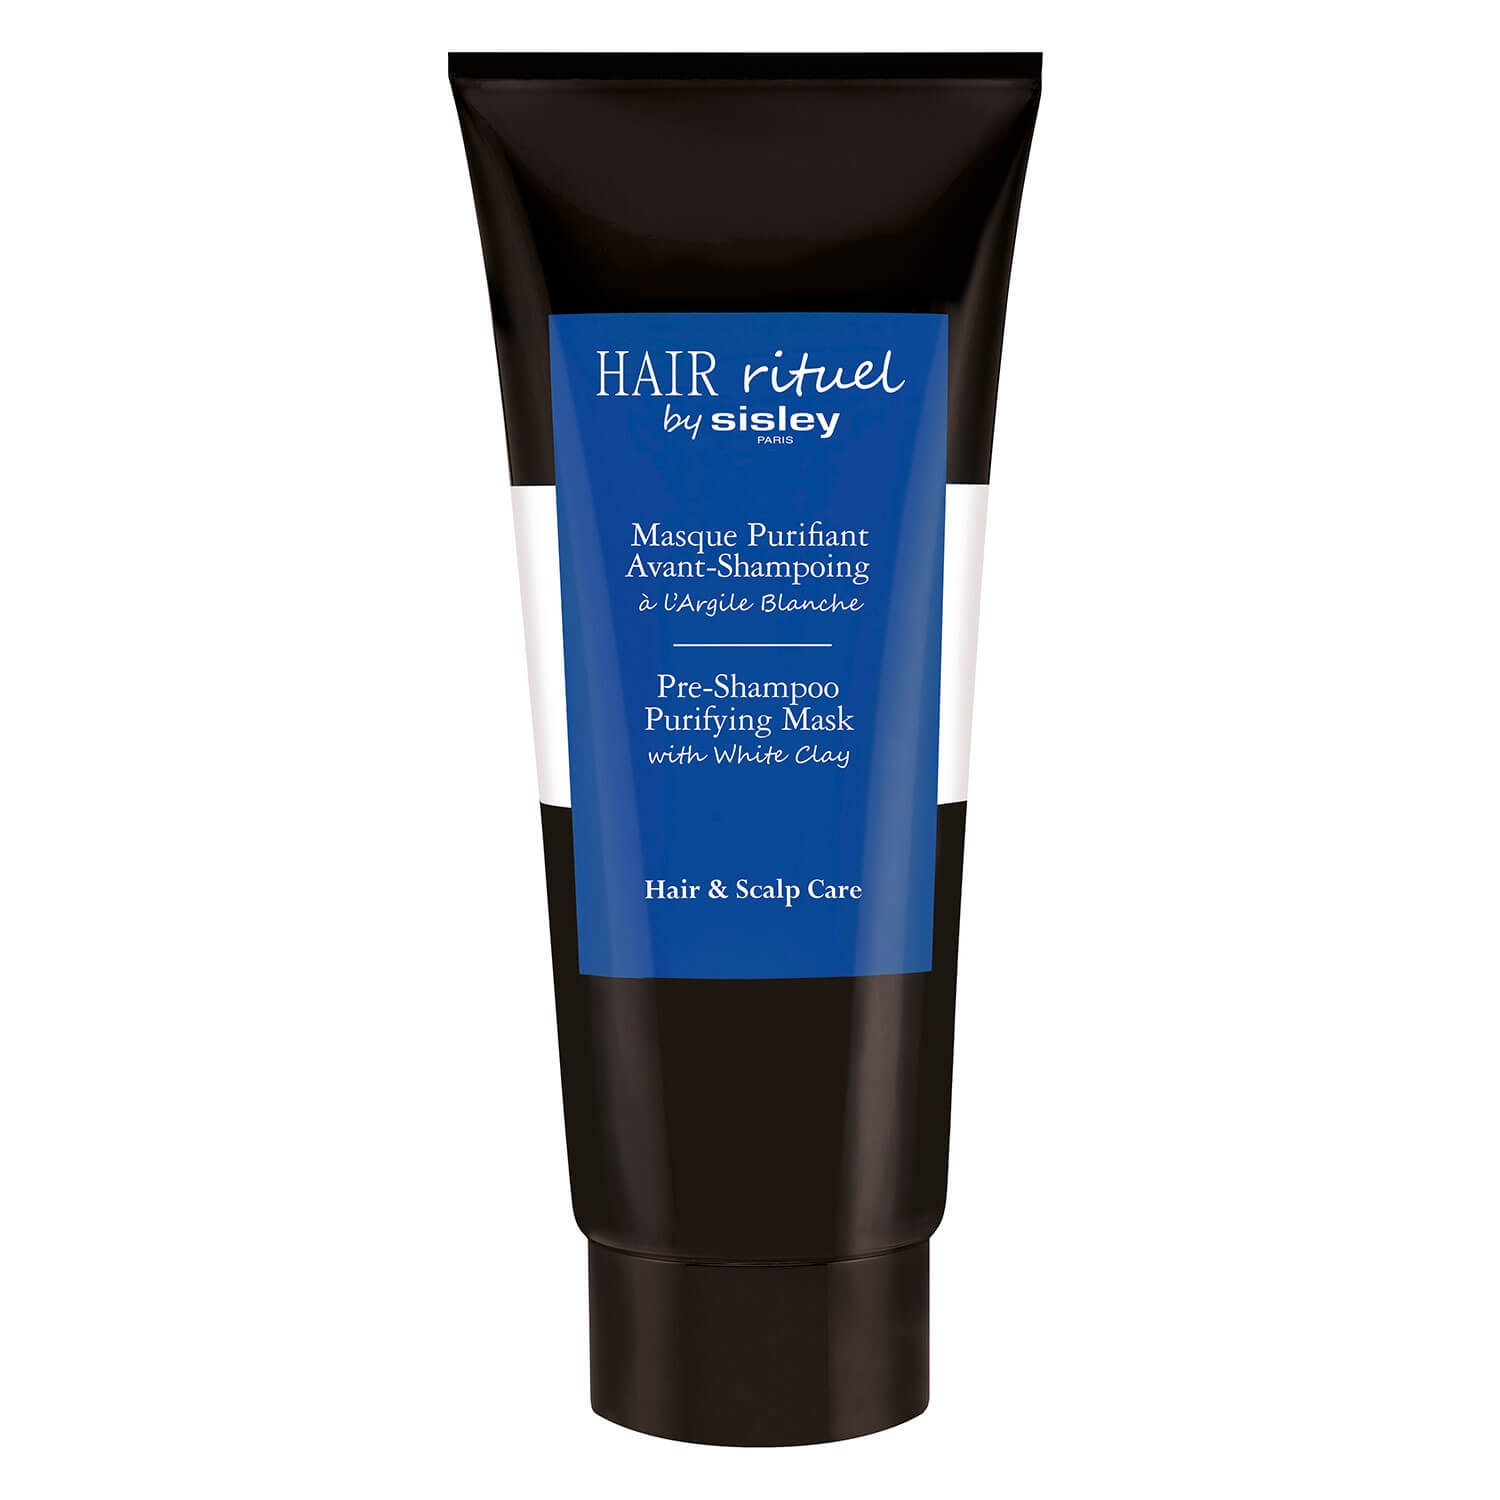 Product image from Hair Rituel by Sisley - Masque Purifiant Avant-Shampoing